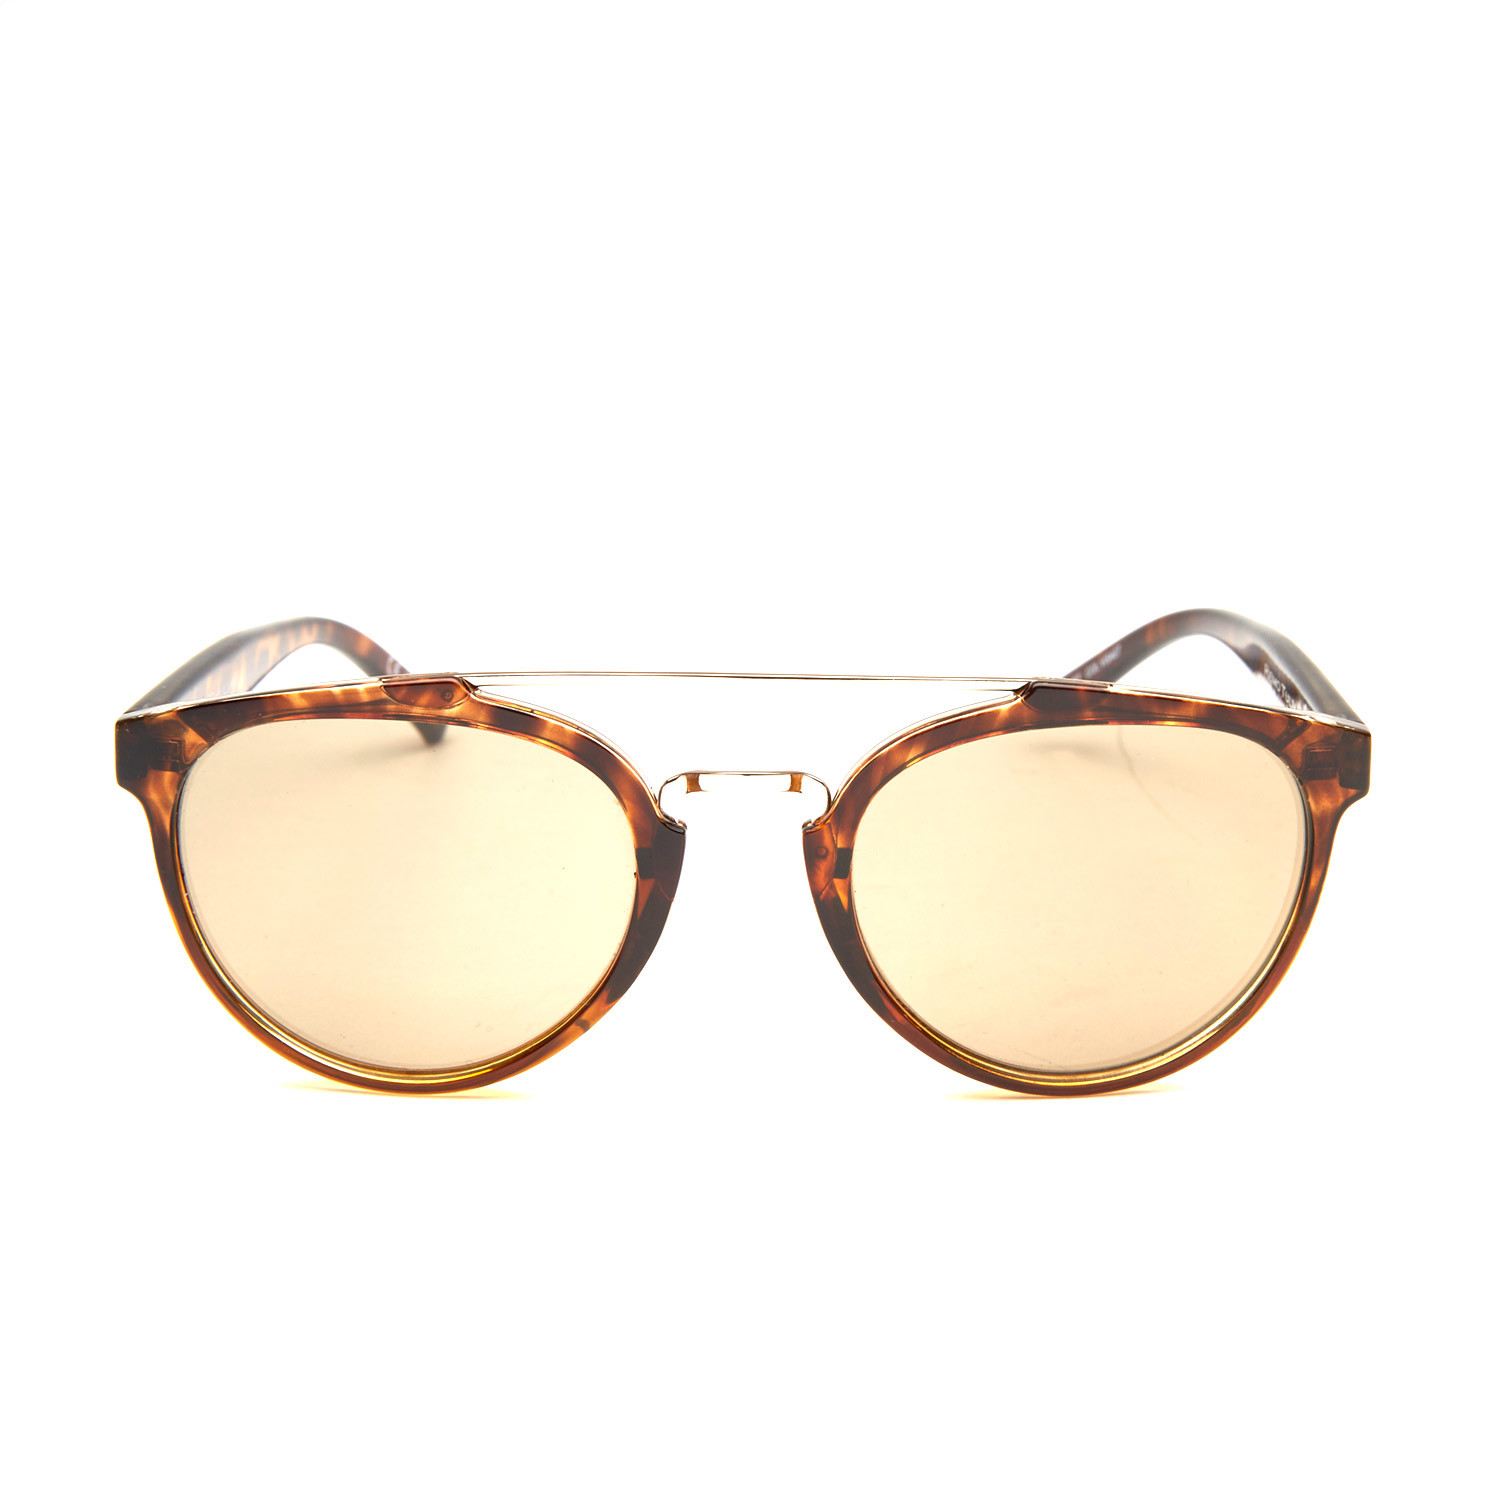 Trust Sunglasses // Tort + Nude Lens - Remo Tulliani - Touch of Modern